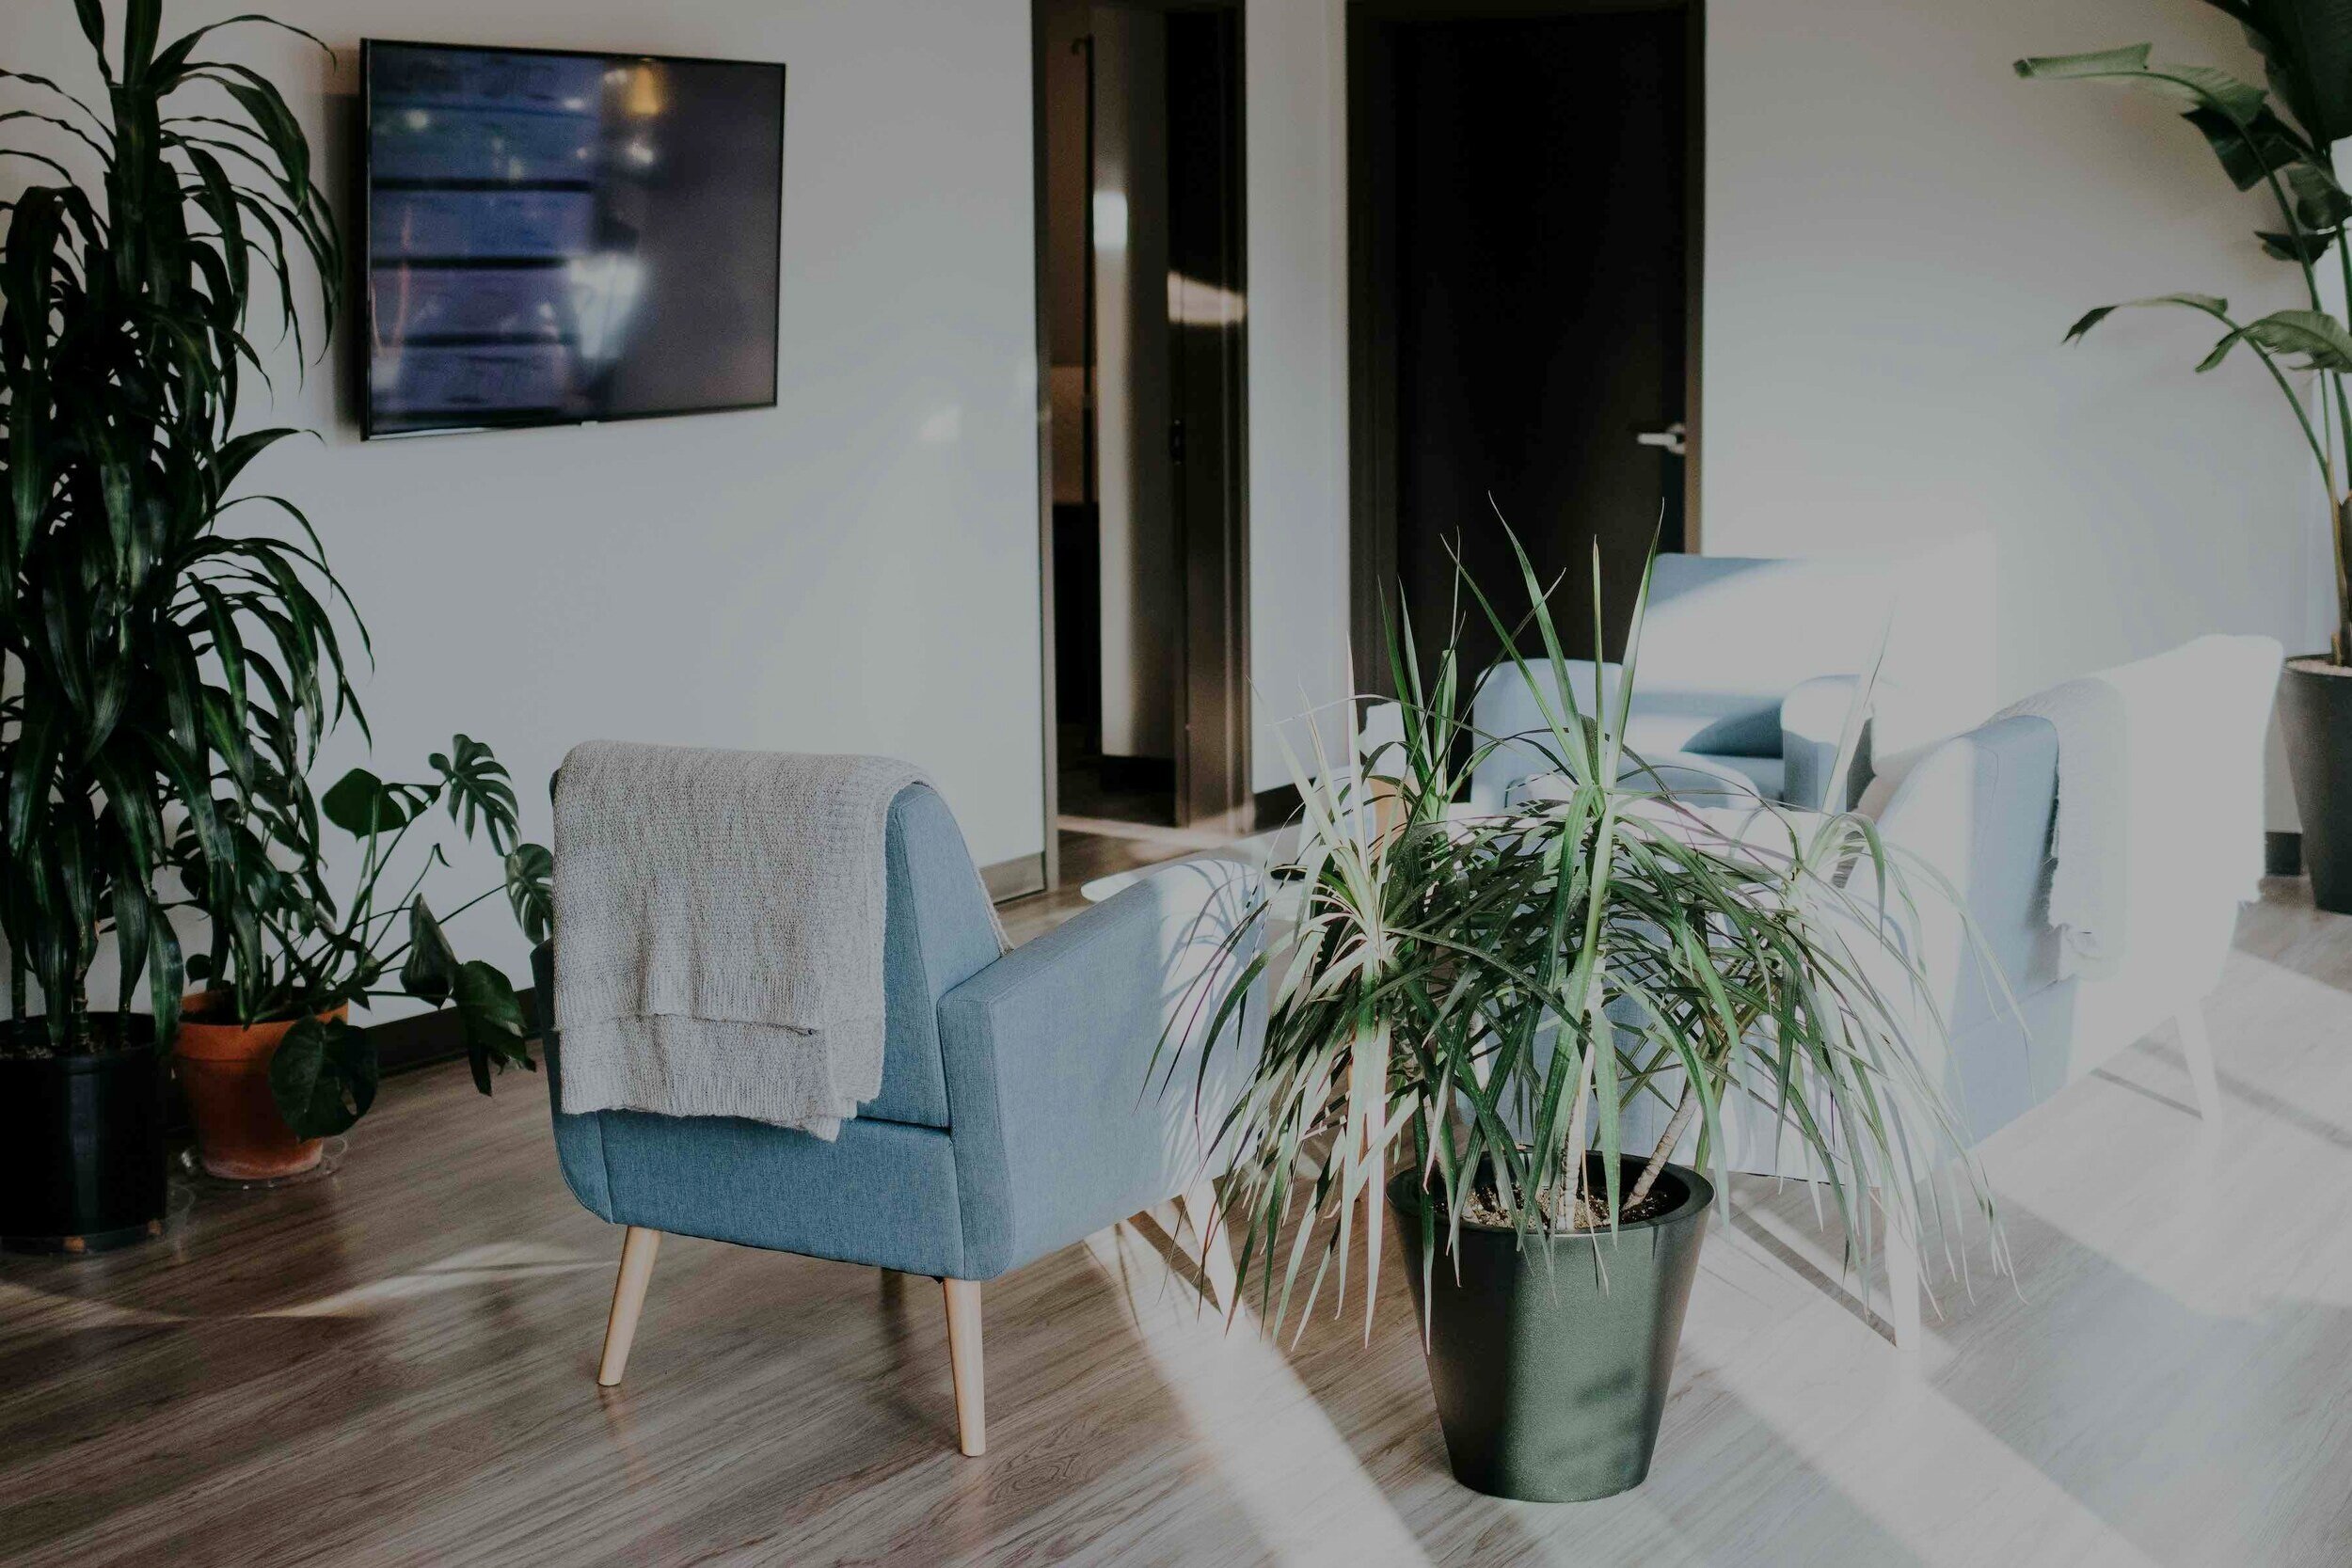 Cozy waiting room with modern furniture and plants.